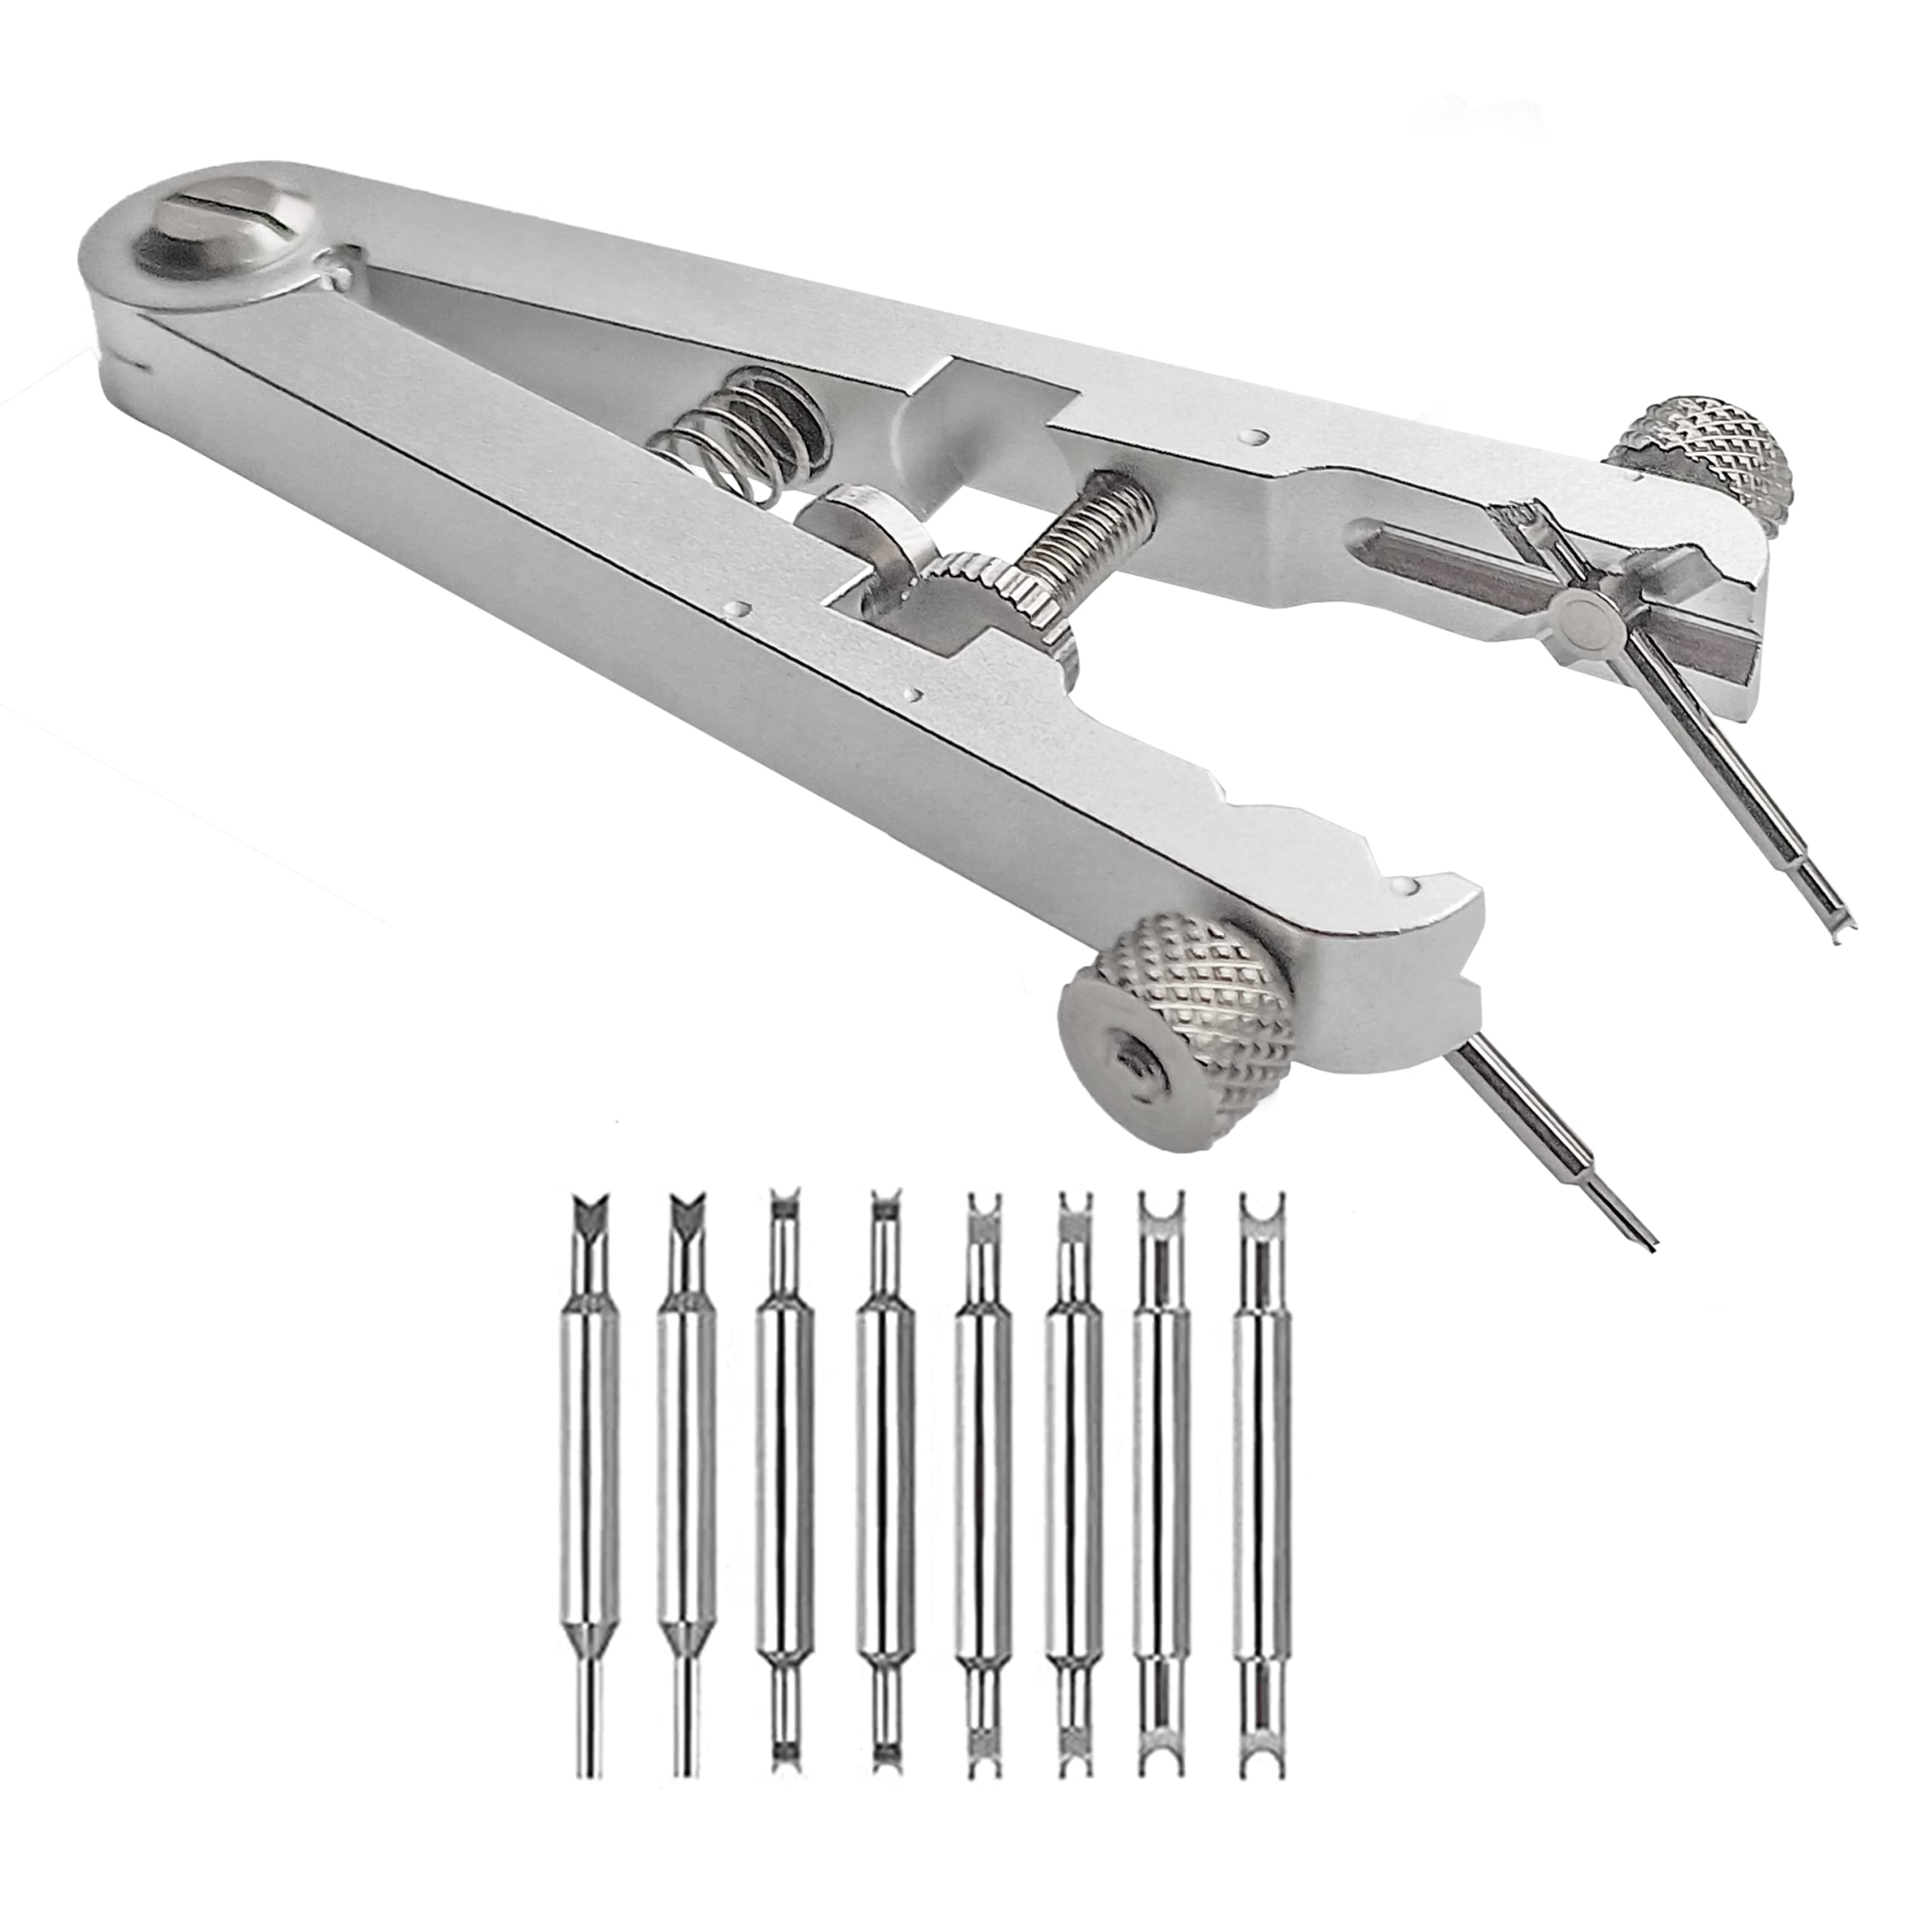 W&S Spring Bar Plier Tool - to Remove and Replace Watch Spring Bar Pins, Watch Straps and Watch Bands